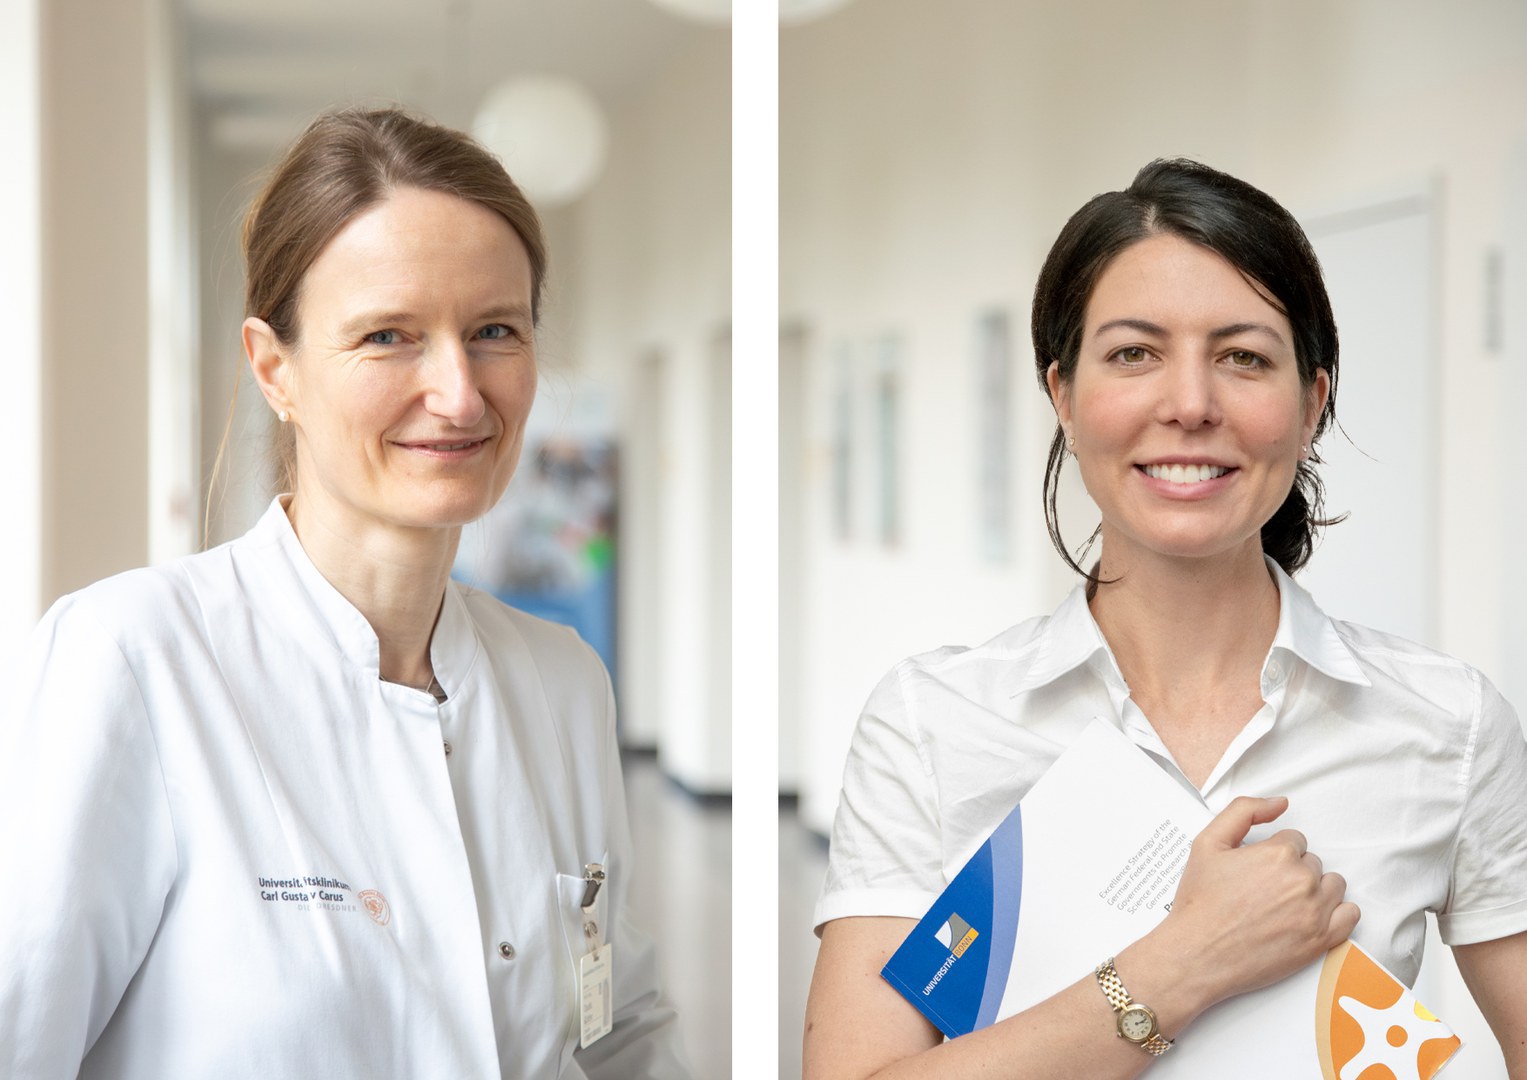 Together, Prof. Claudia Günther (left) from Dresden and Prof. Eva Bartok (right) from Bonn - are investigating the connection between myotonic dystrophy and autoimmune diseases.